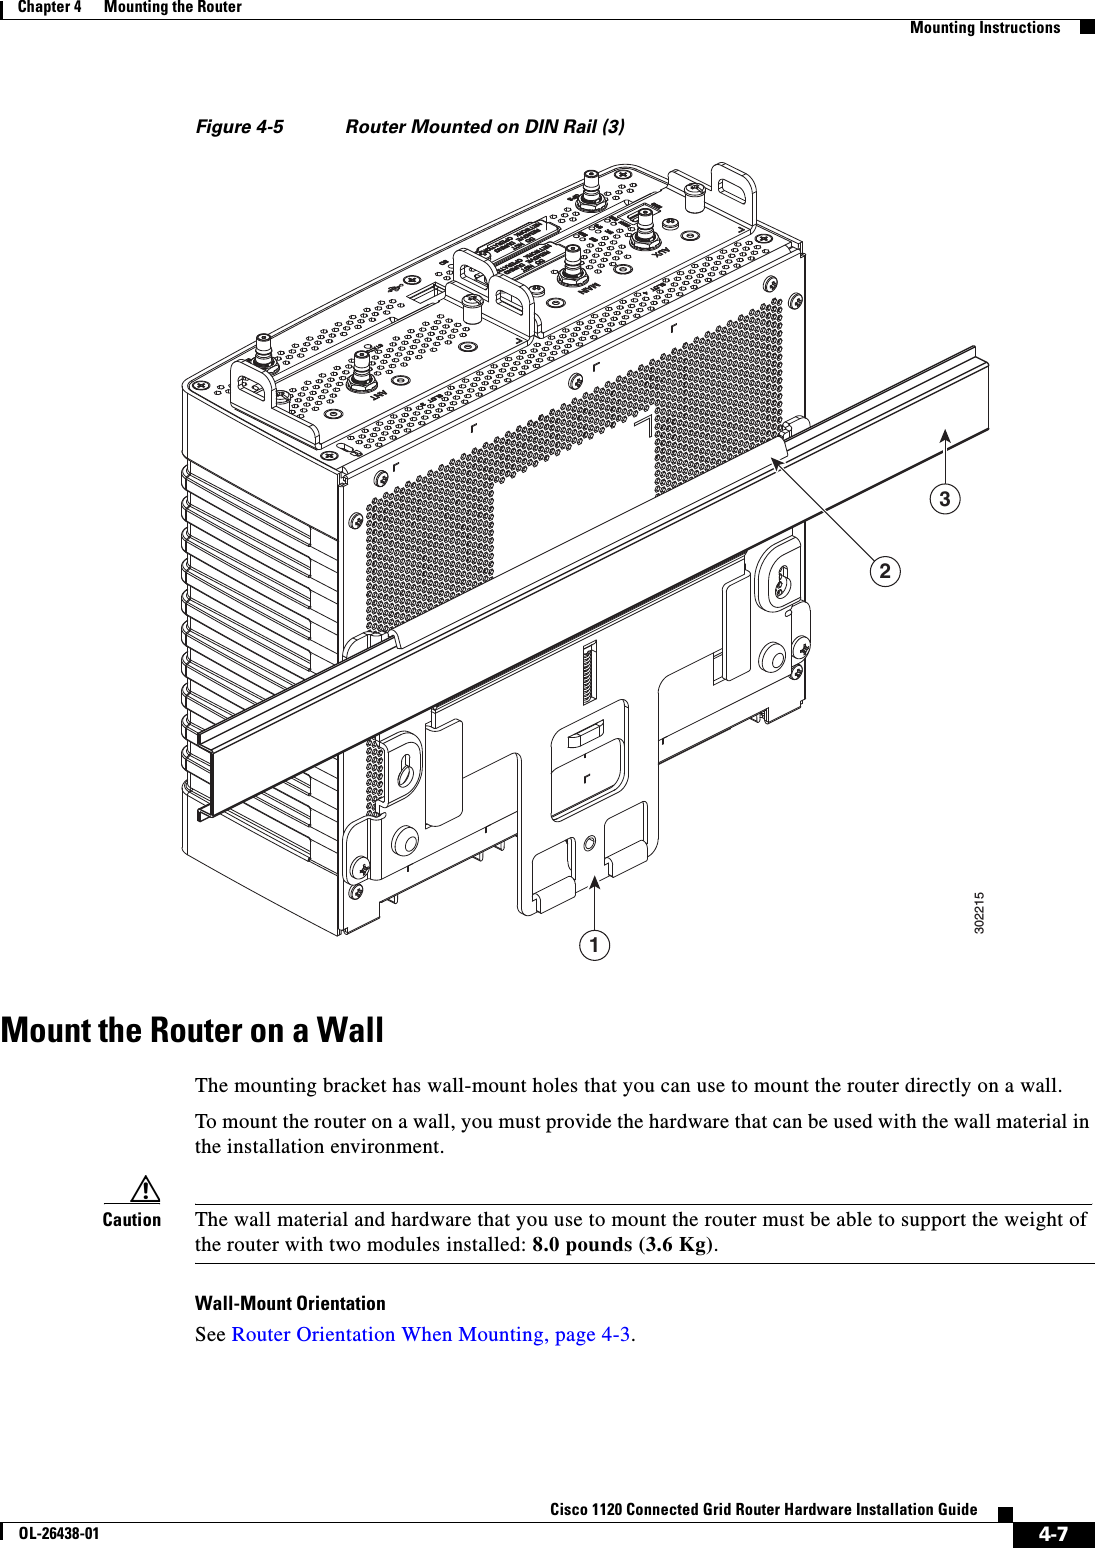  4-7Cisco 1120 Connected Grid Router Hardware Installation GuideOL-26438-01Chapter 4      Mounting the Router  Mounting InstructionsFigure 4-5 Router Mounted on DIN Rail (3)Mount the Router on a WallThe mounting bracket has wall-mount holes that you can use to mount the router directly on a wall.To mount the router on a wall, you must provide the hardware that can be used with the wall material in the installation environment. Caution The wall material and hardware that you use to mount the router must be able to support the weight of the router with two modules installed: 8.0 pounds (3.6 Kg).Wall-Mount OrientationSee Router Orientation When Mounting, page 4-3.302215132